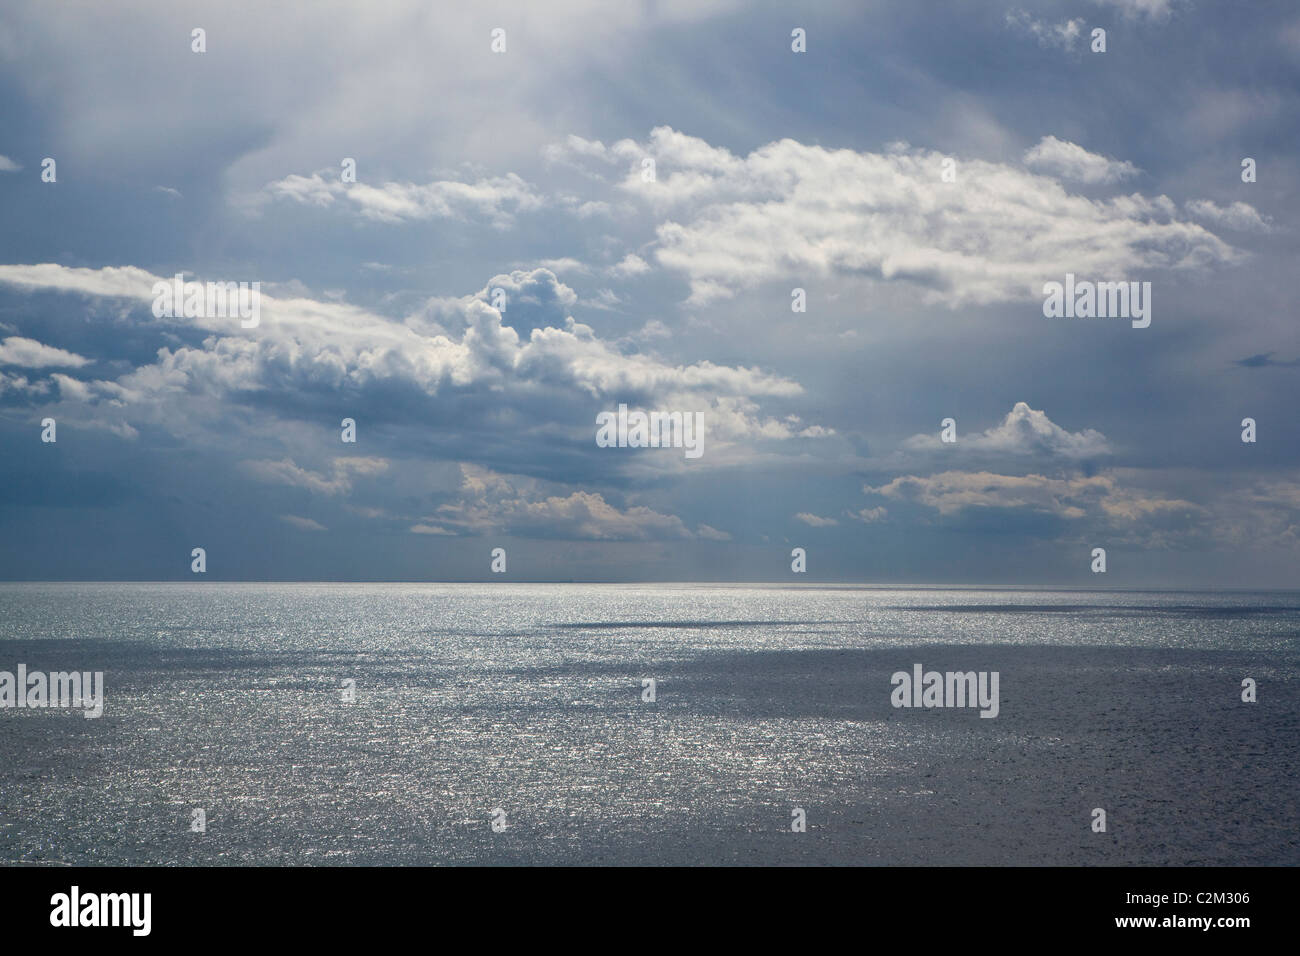 A seascape with clouds over the Irish Sea Stock Photo